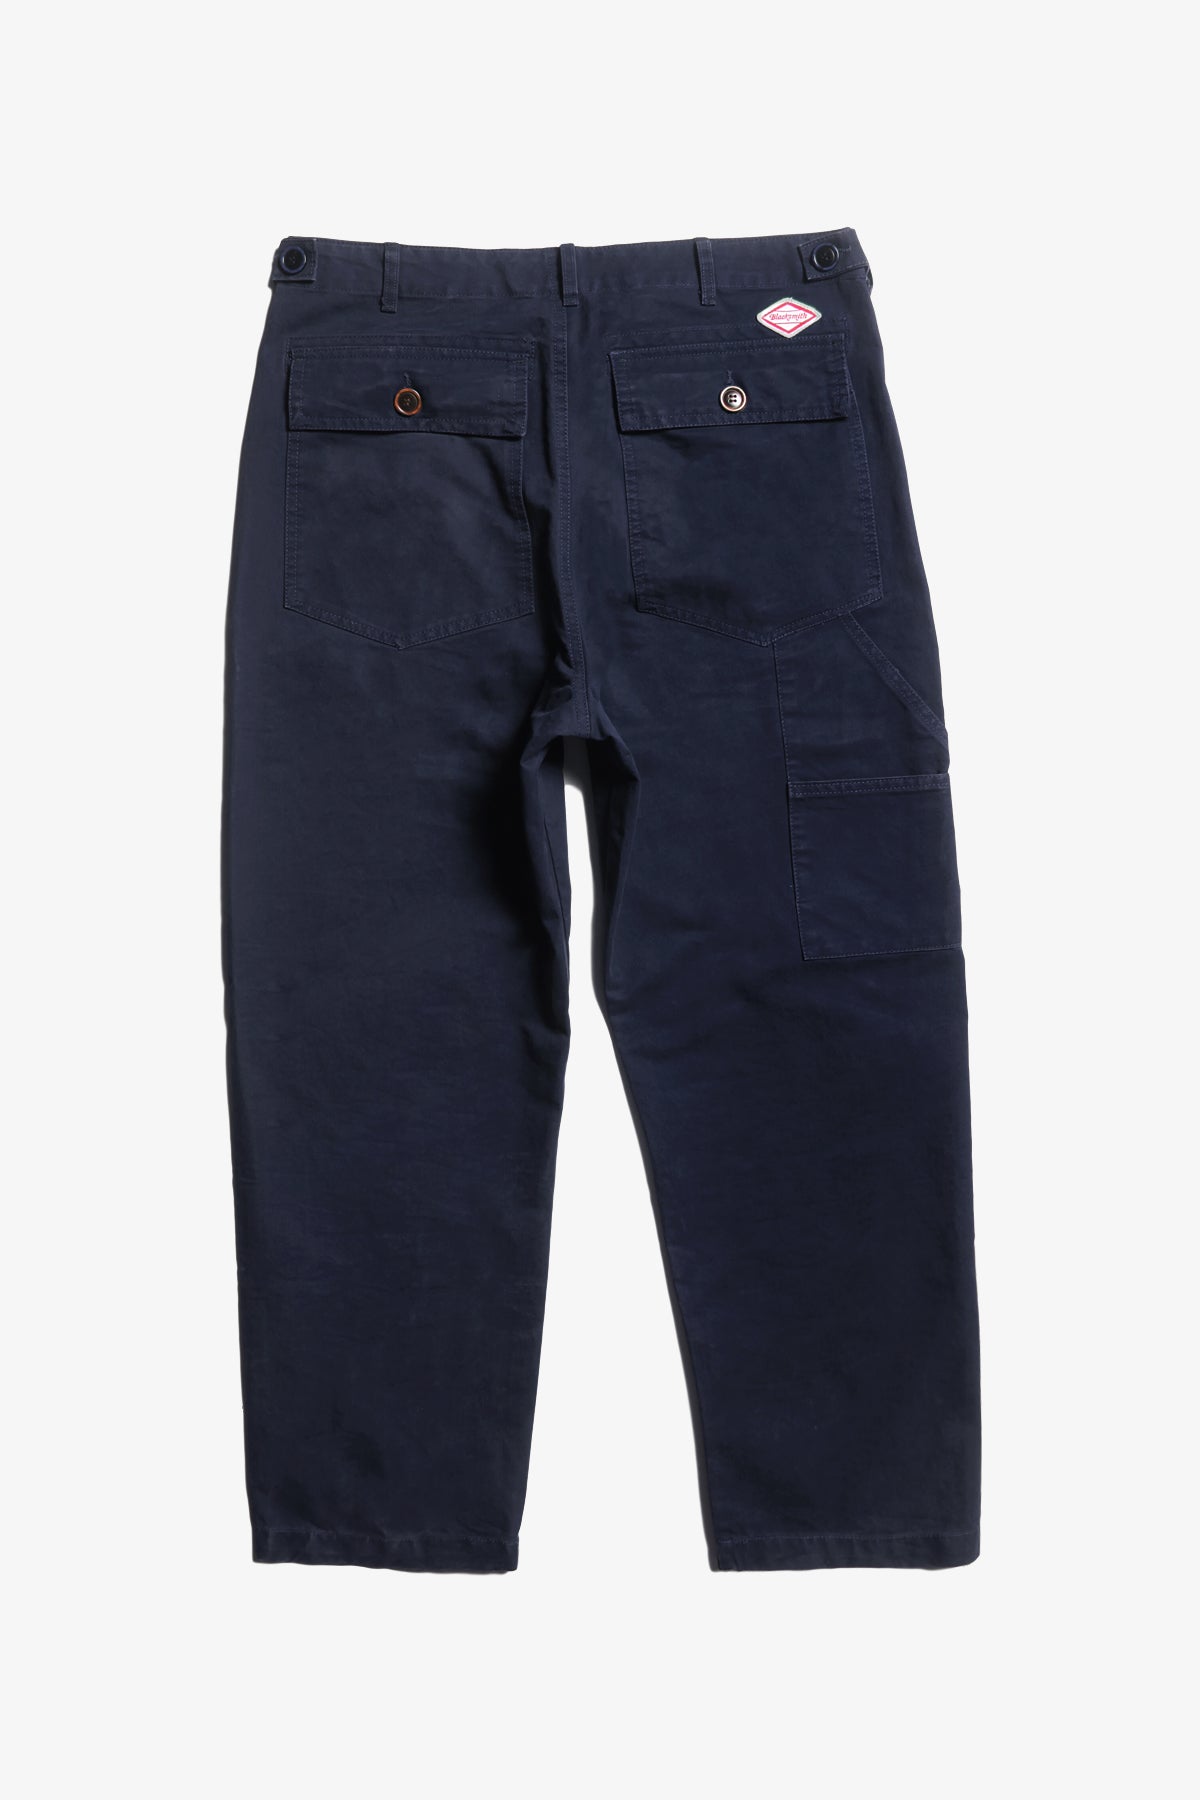 Blacksmith - Sowing Field Pants - Navy